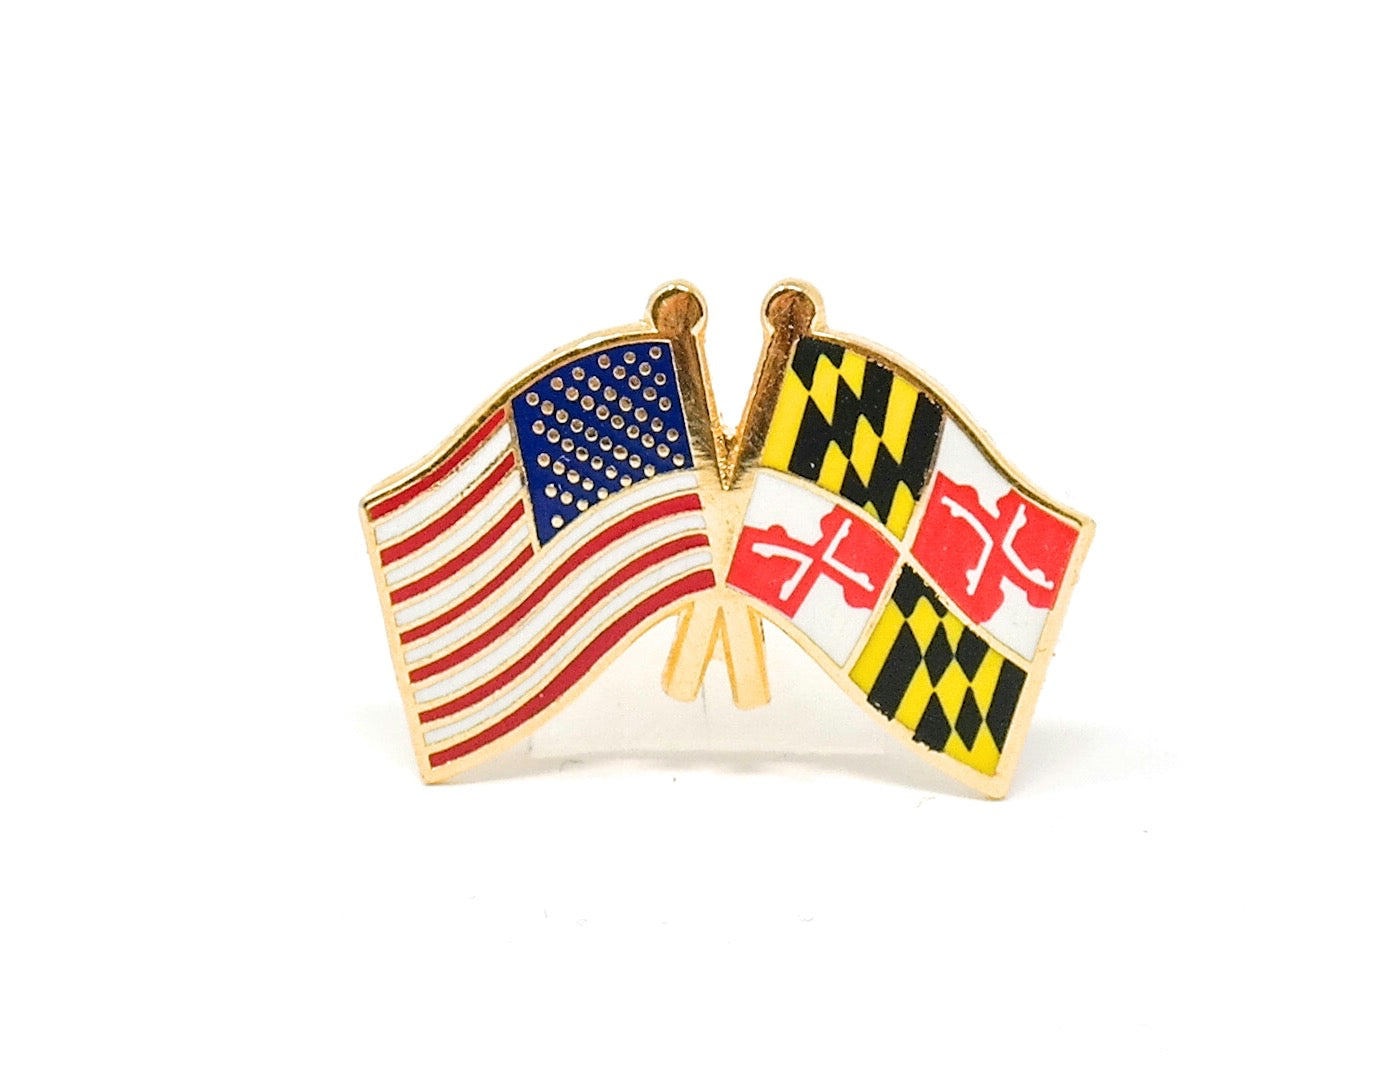 Maryland State & USA Friendship Flags Lapel Pin